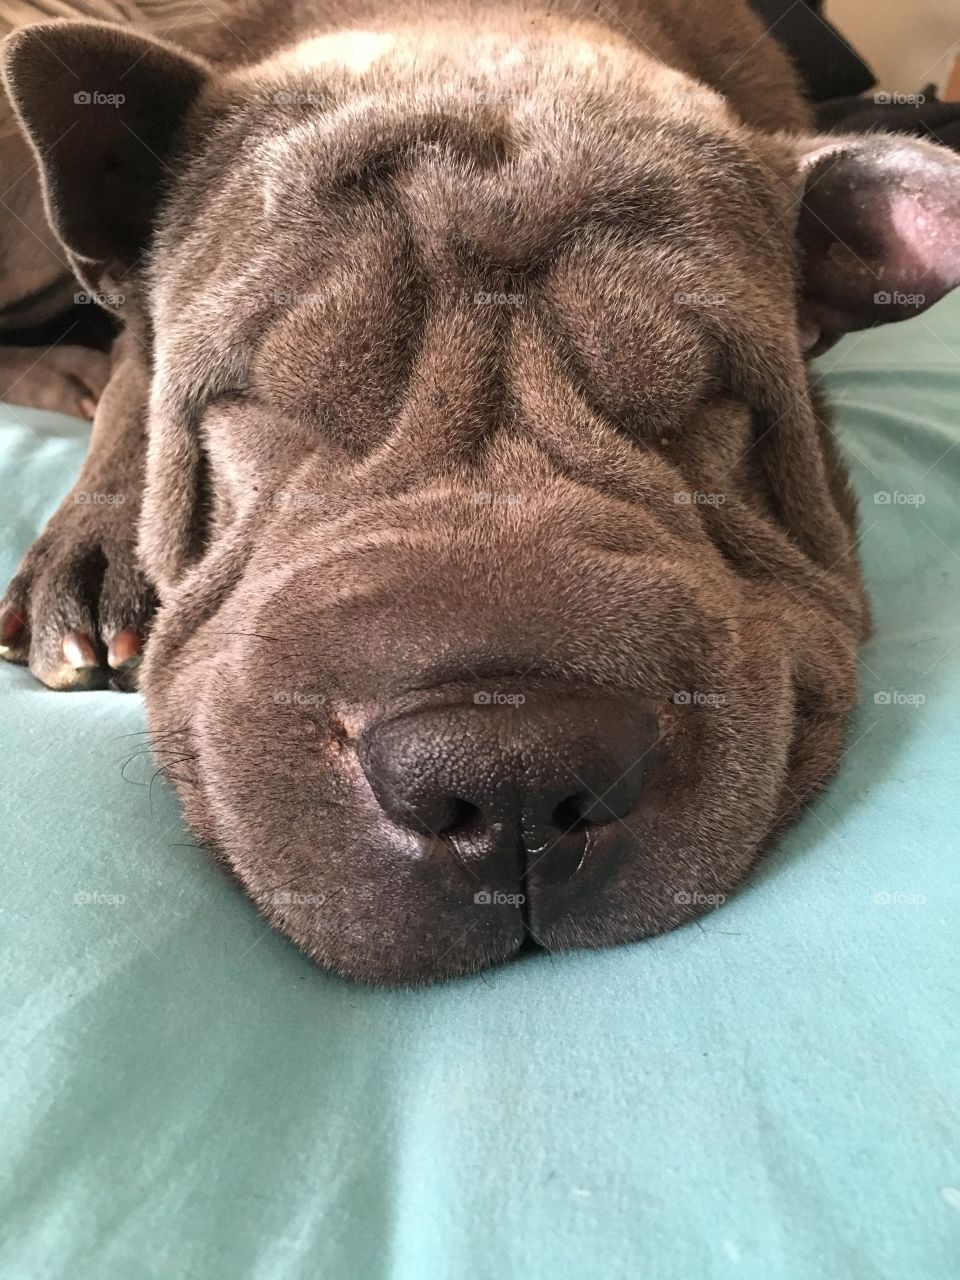 My Sharpei, Syke is so adorable when he lays down. Because of his beautiful wrinkles his face kind of melts when he lays down and his wrinkles for the shape of a smile :) I adore him!